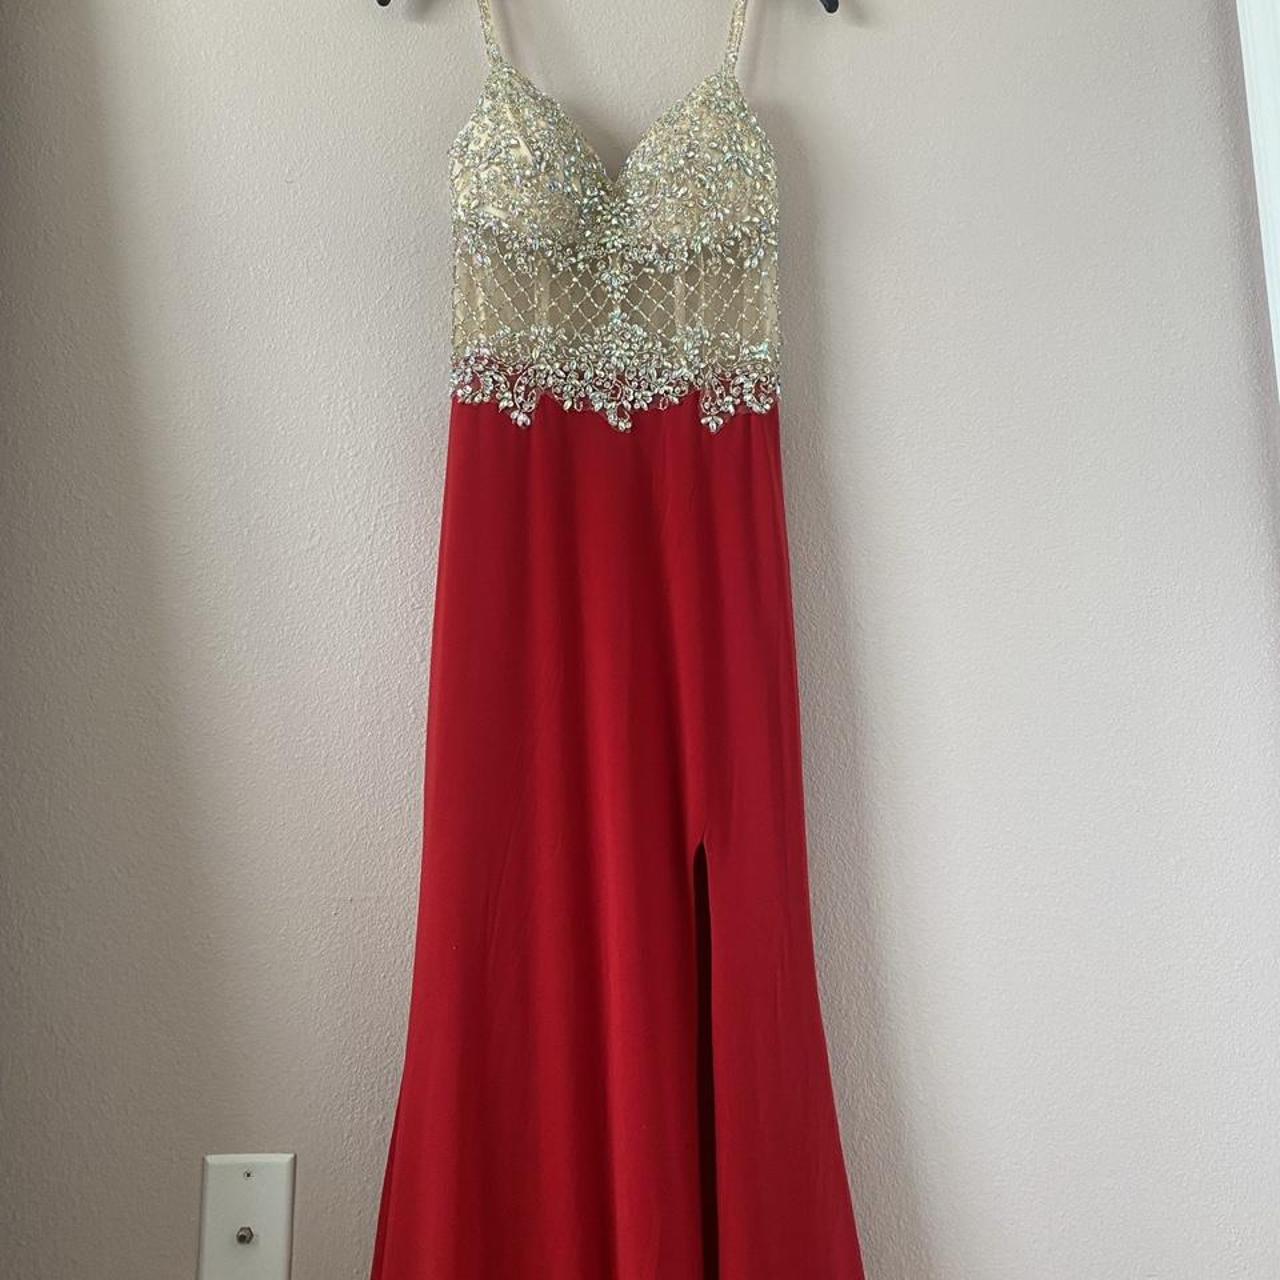 Product Image 2 - Red and Rhinestones Prom Dress